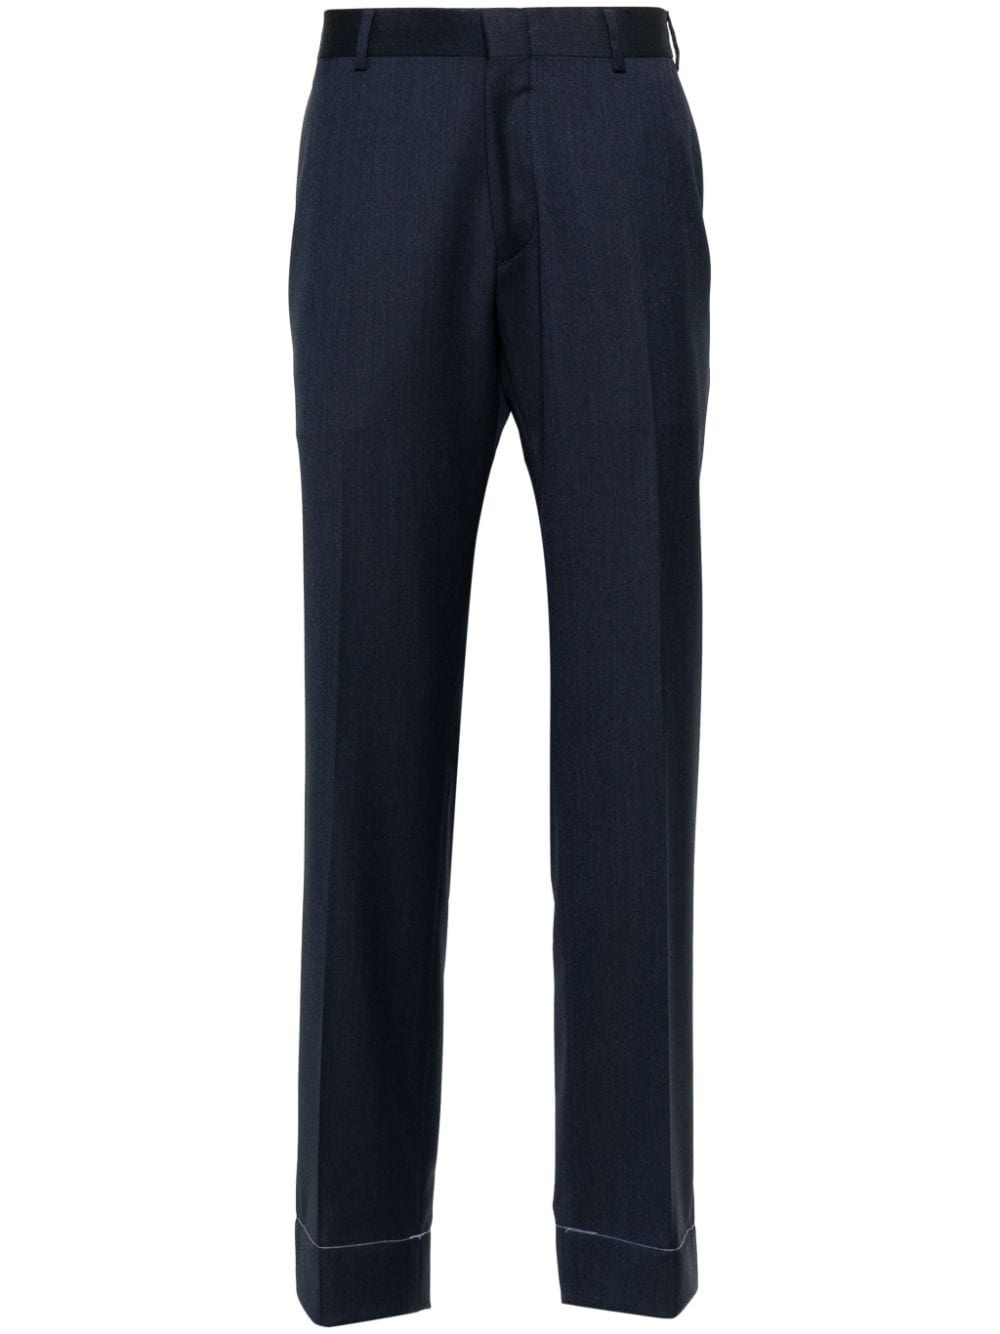 pressed-crease concealed-fastening tailored trousers - 1